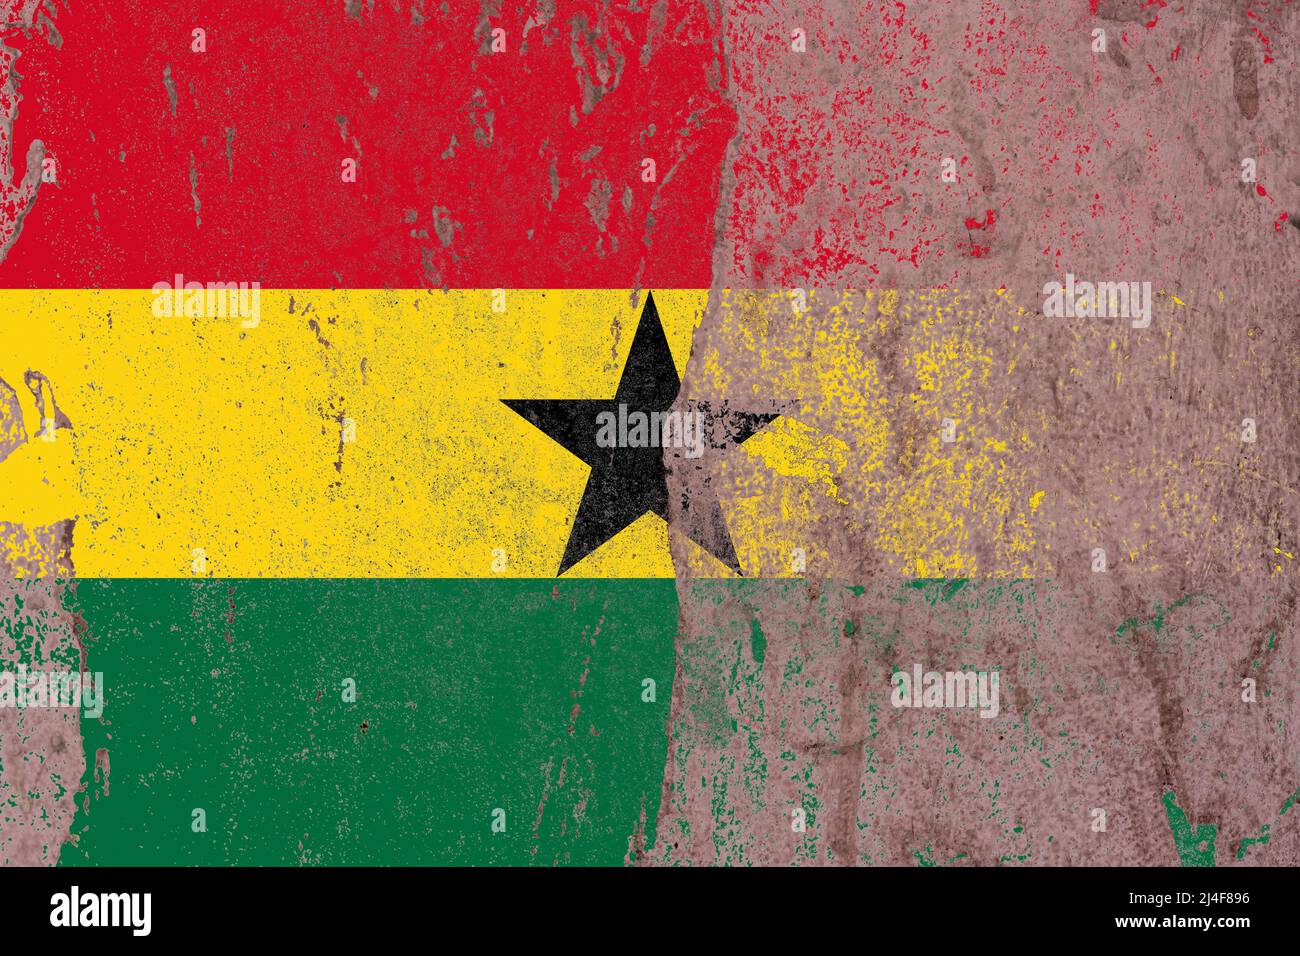 Ghana flag on a damaged old concrete wall surface Stock Photo